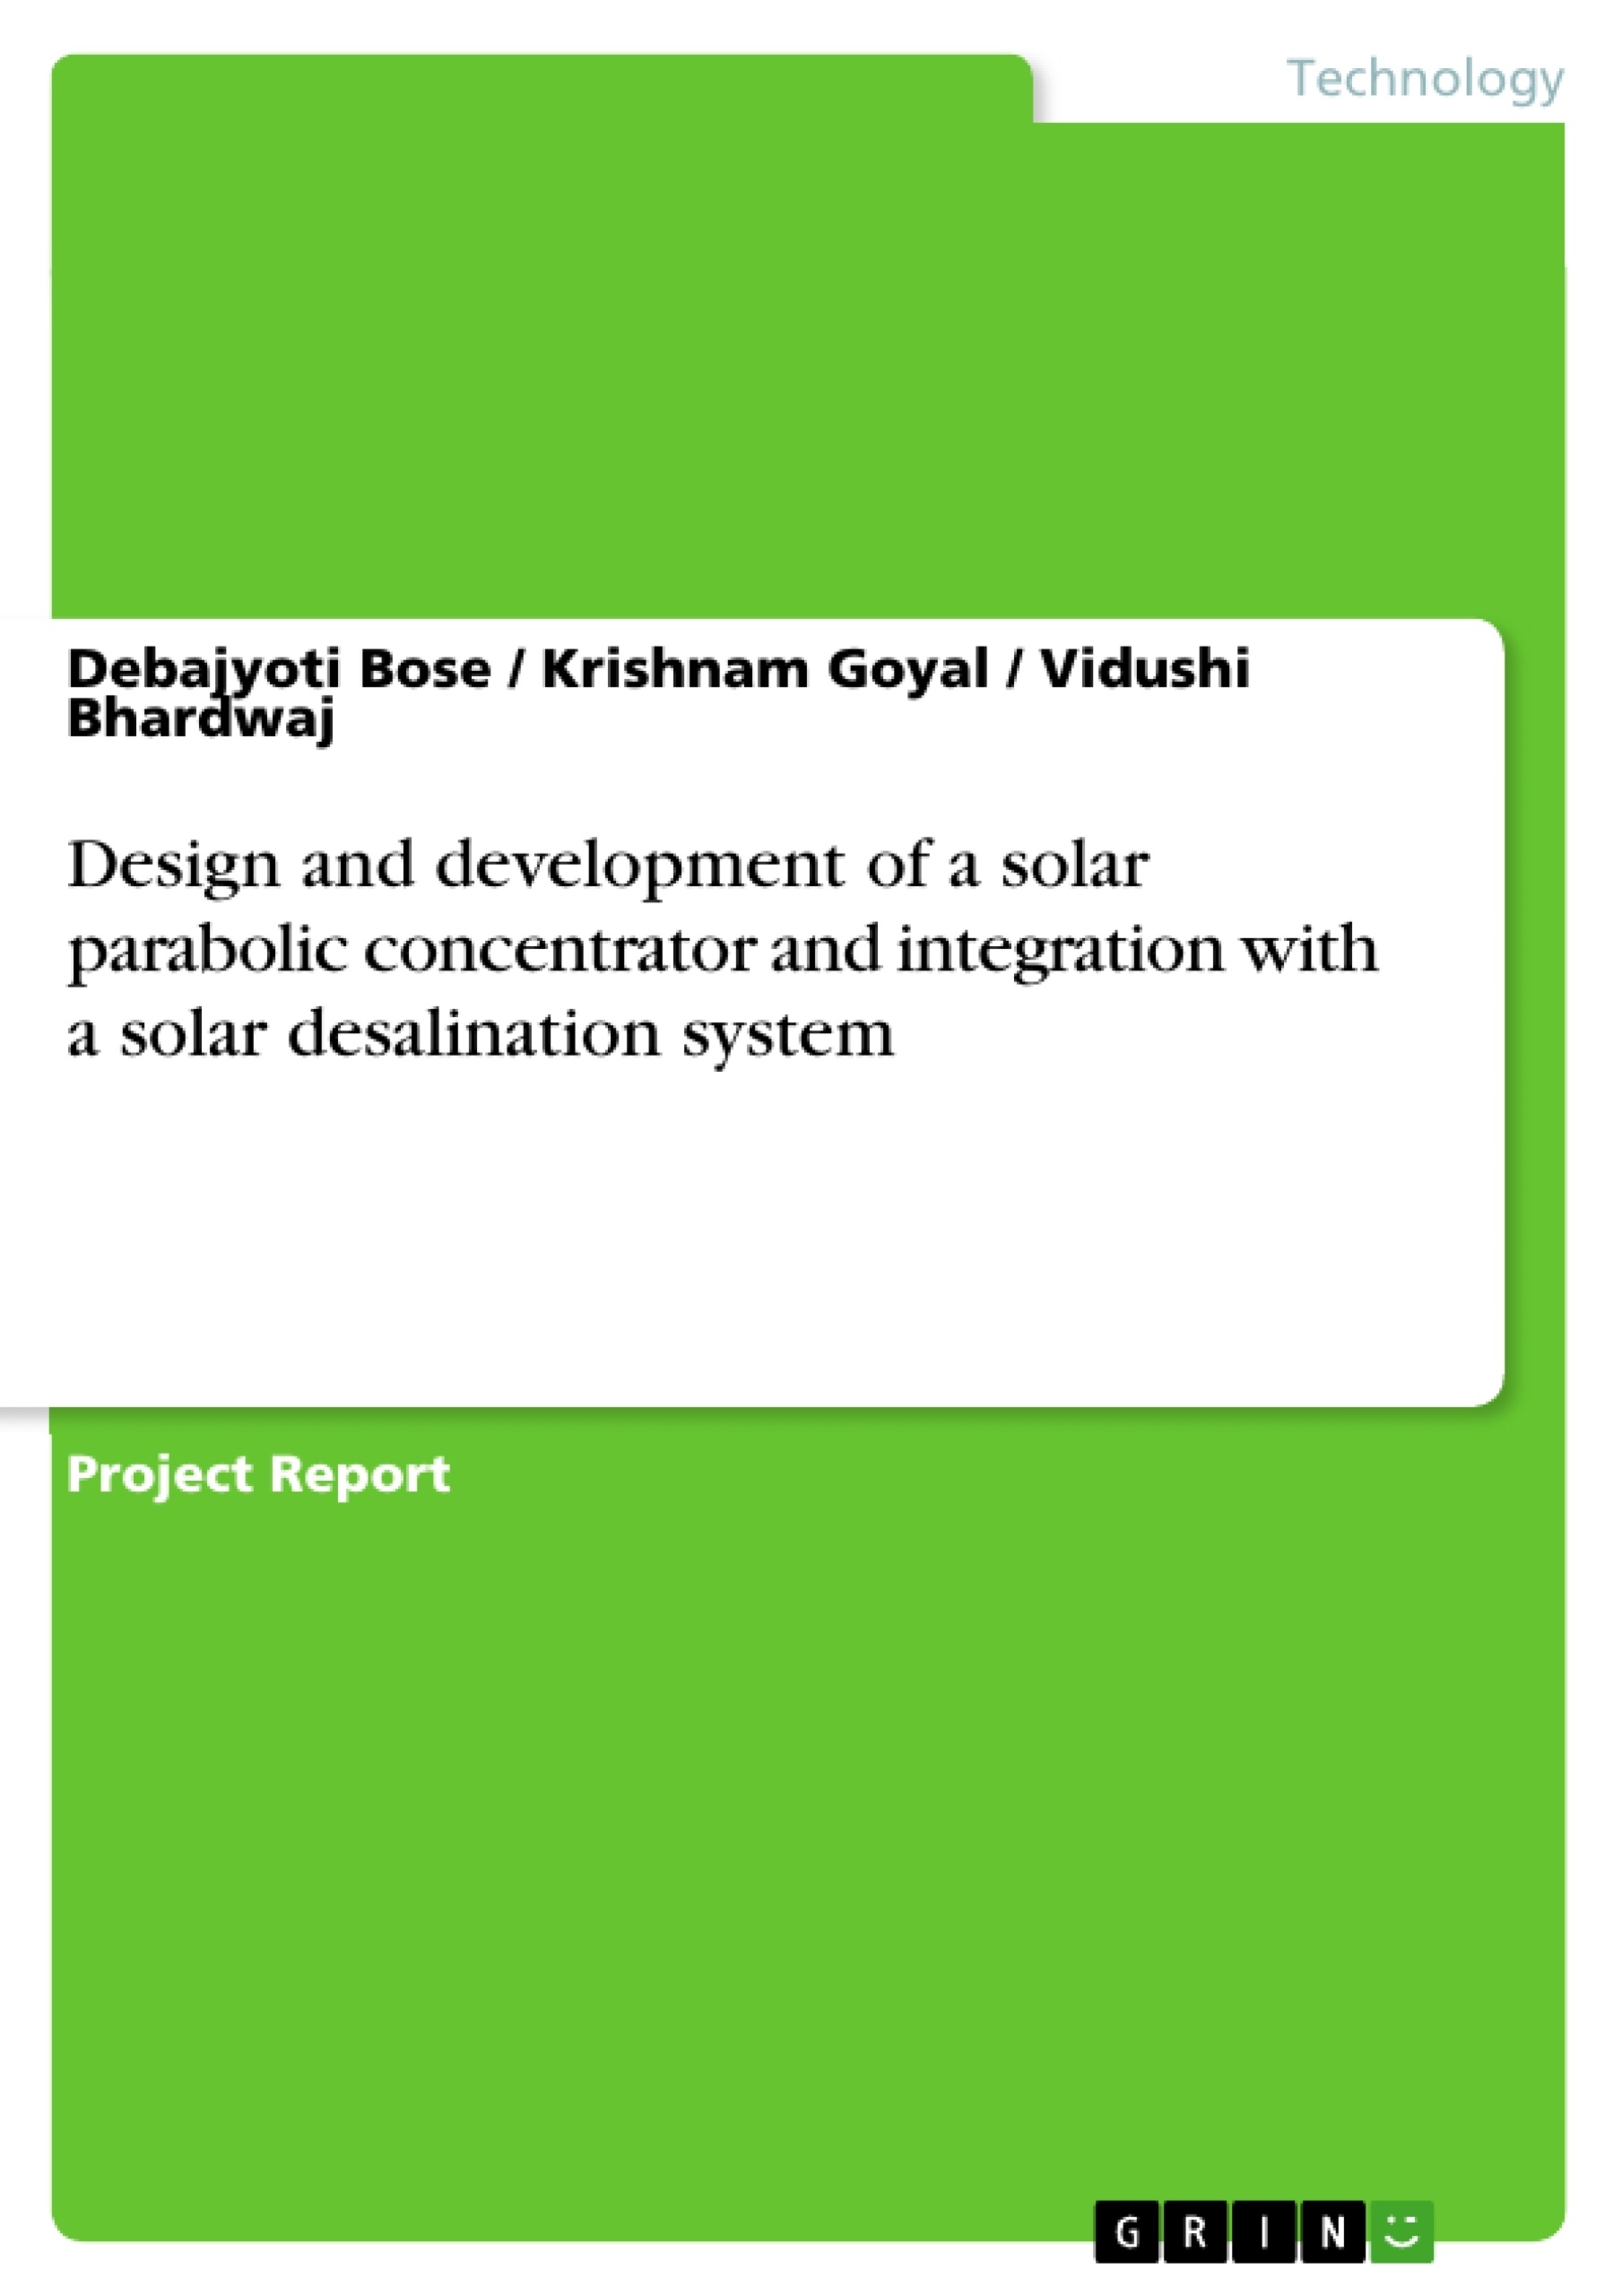 Título: Design and development of a solar parabolic concentrator and integration with a solar desalination system